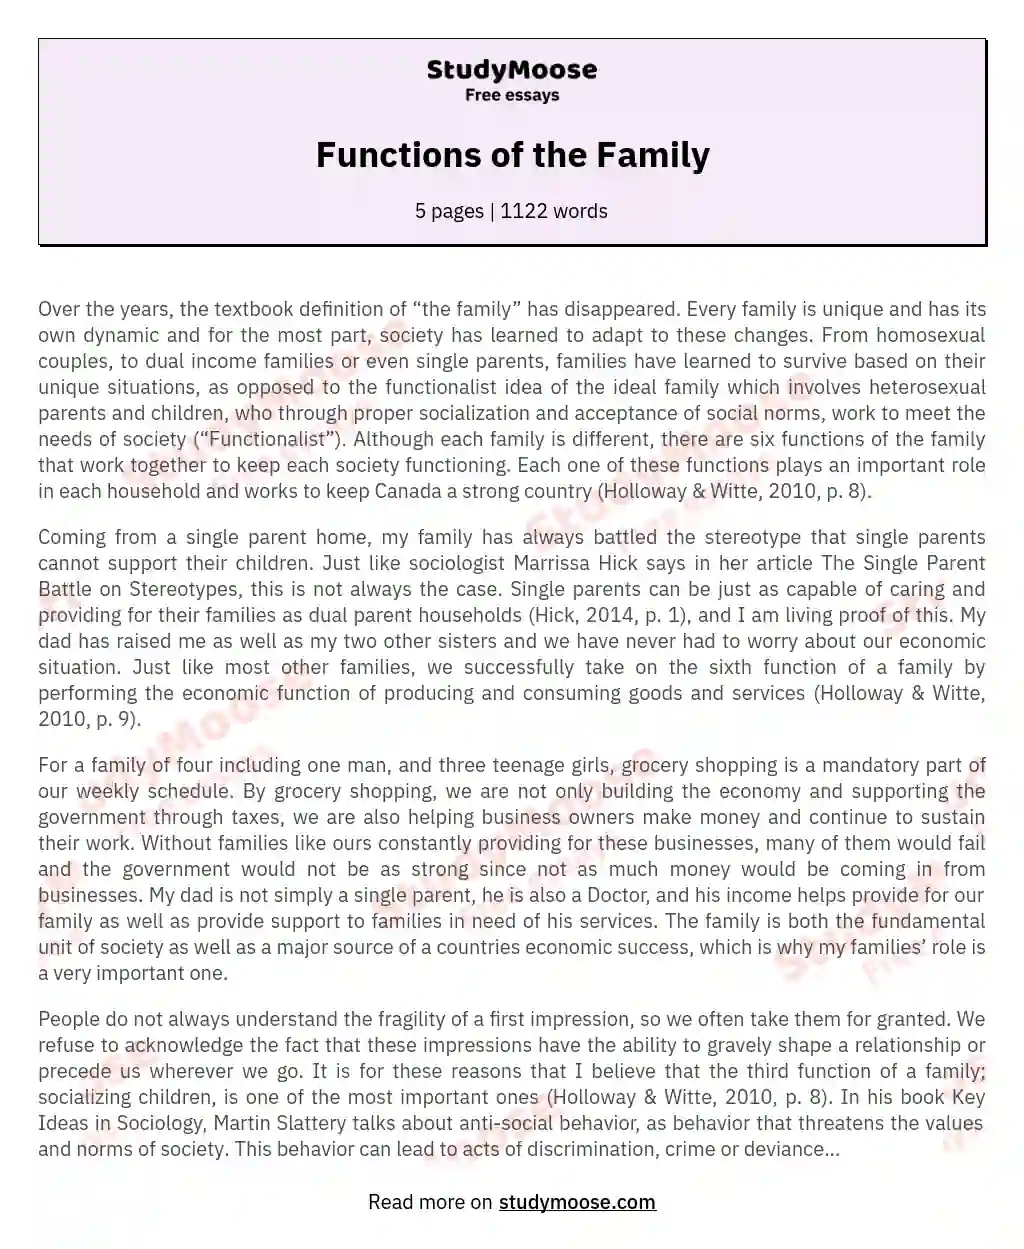 Functions of the Family essay